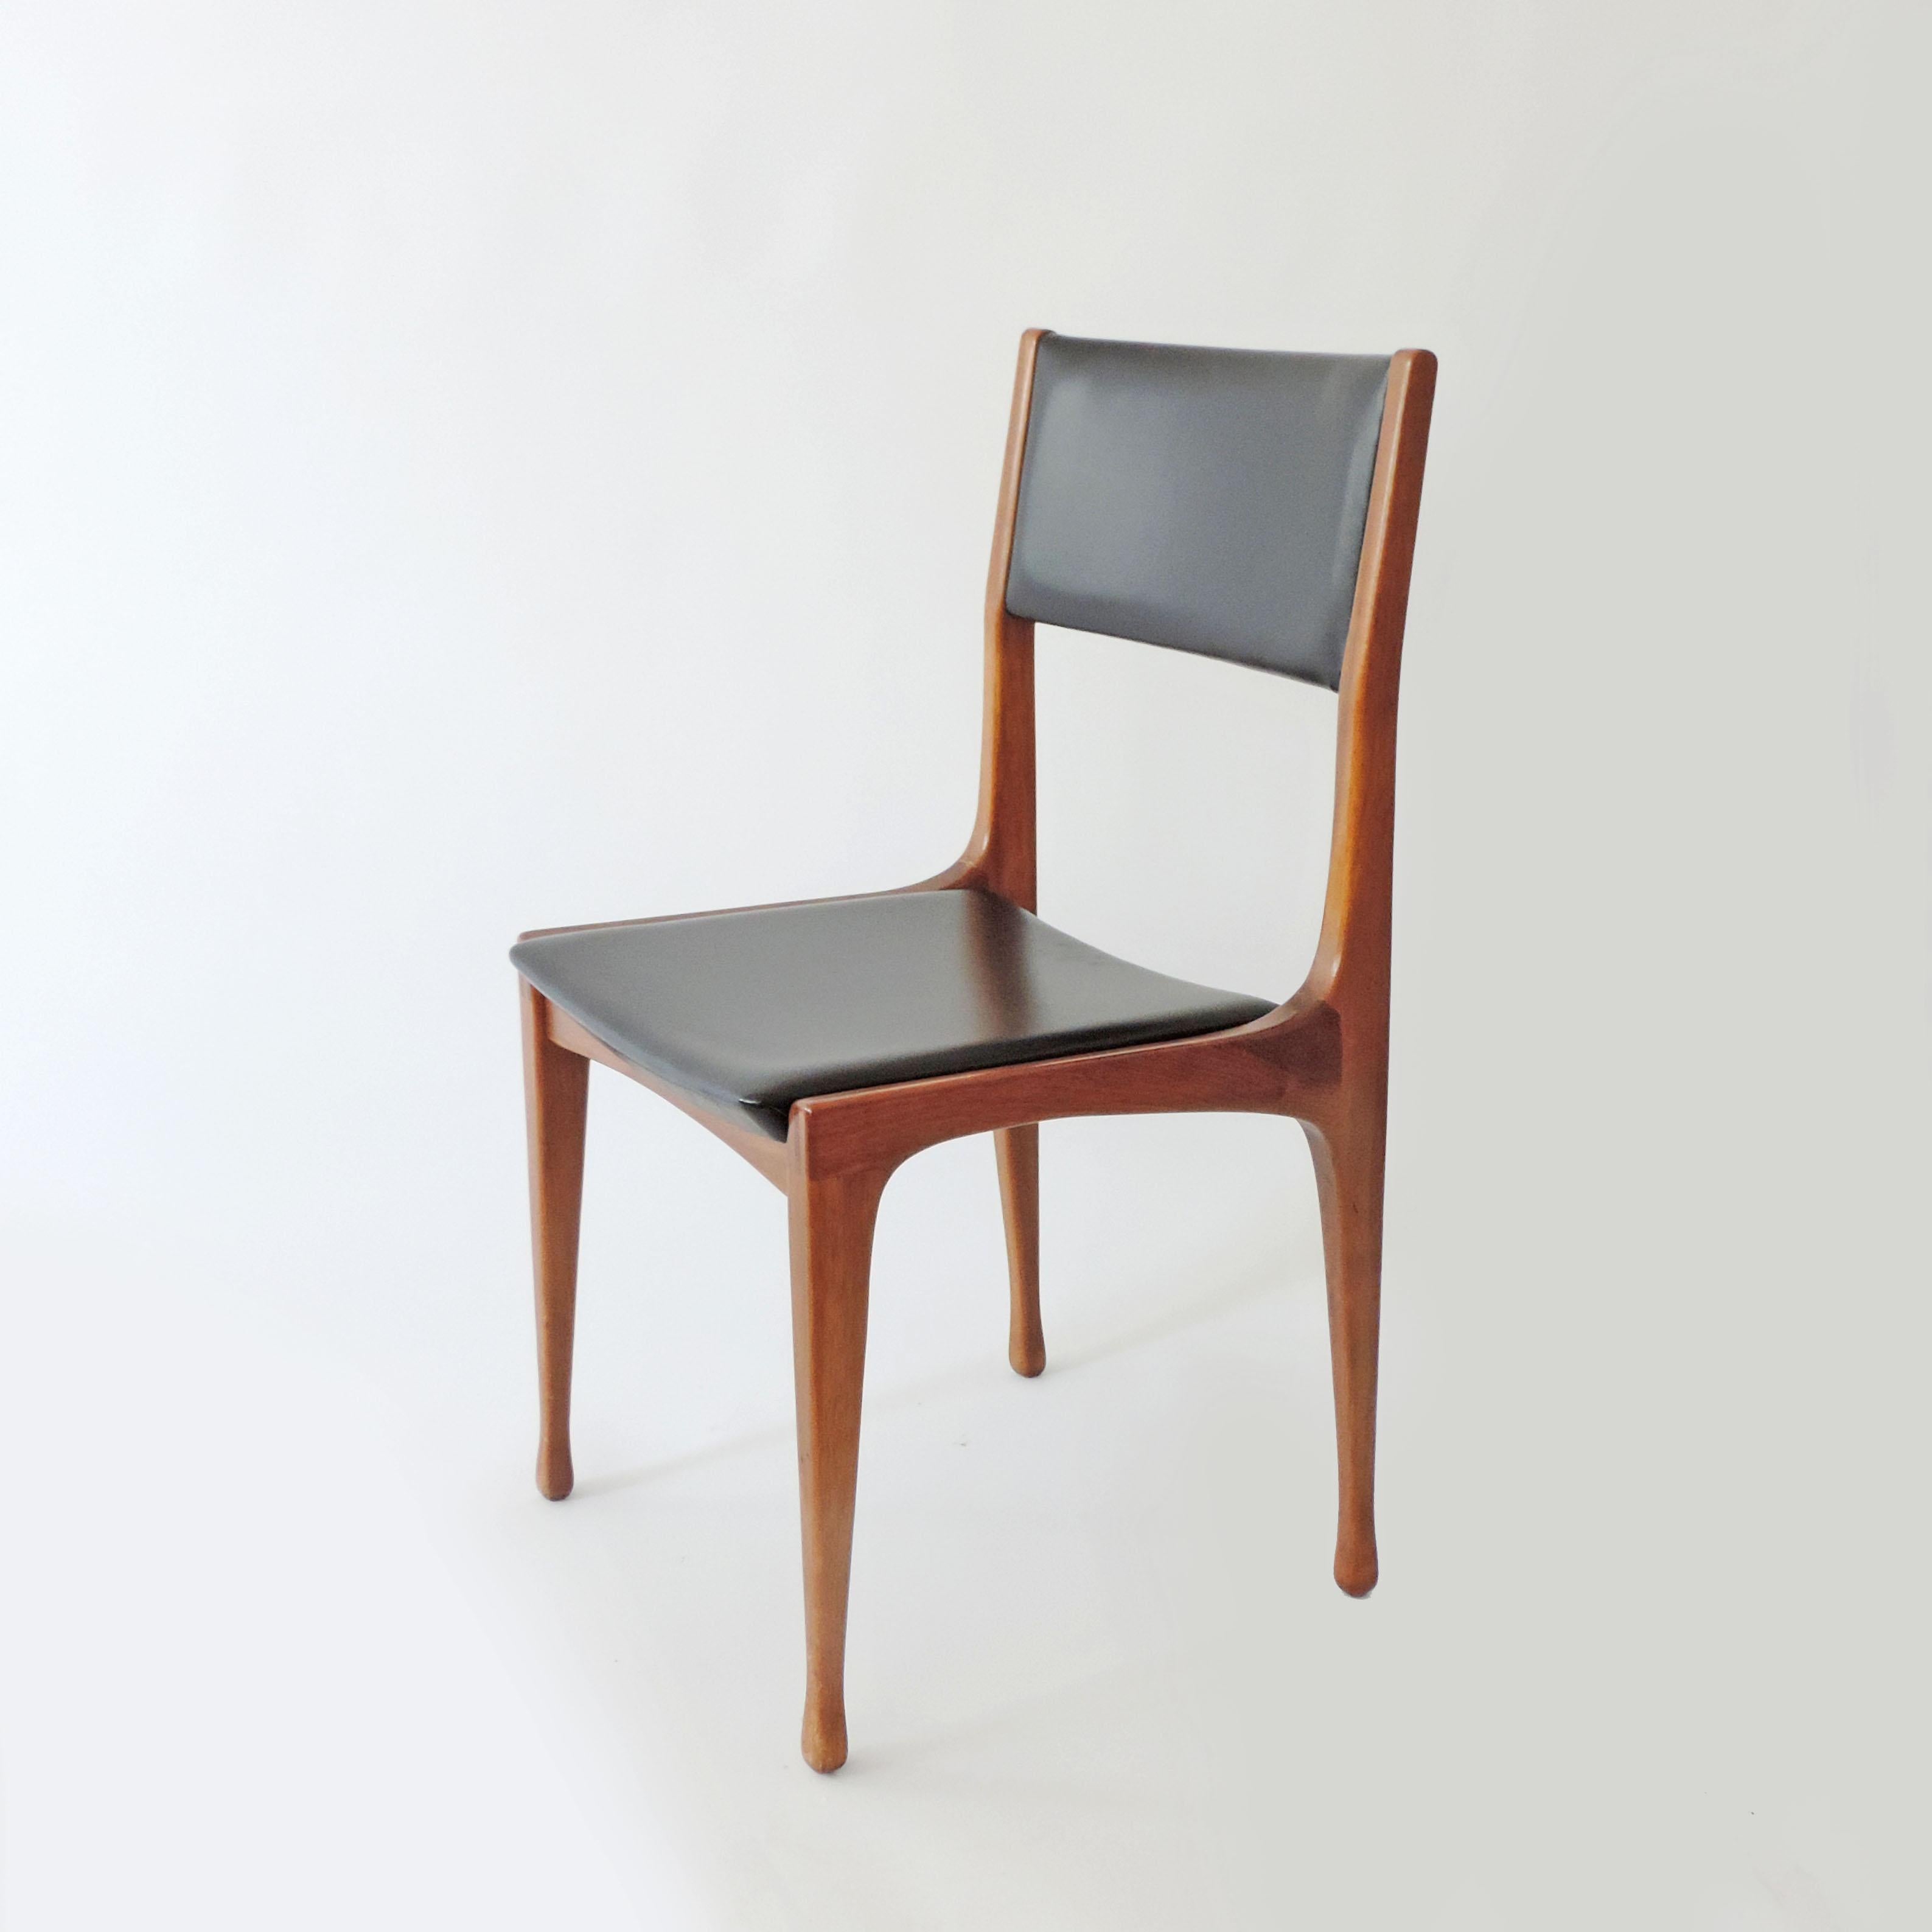 Carlo De Carli set of six dining chairs mod. 693 for Cassina, Italy, 1958
Original faux leather.